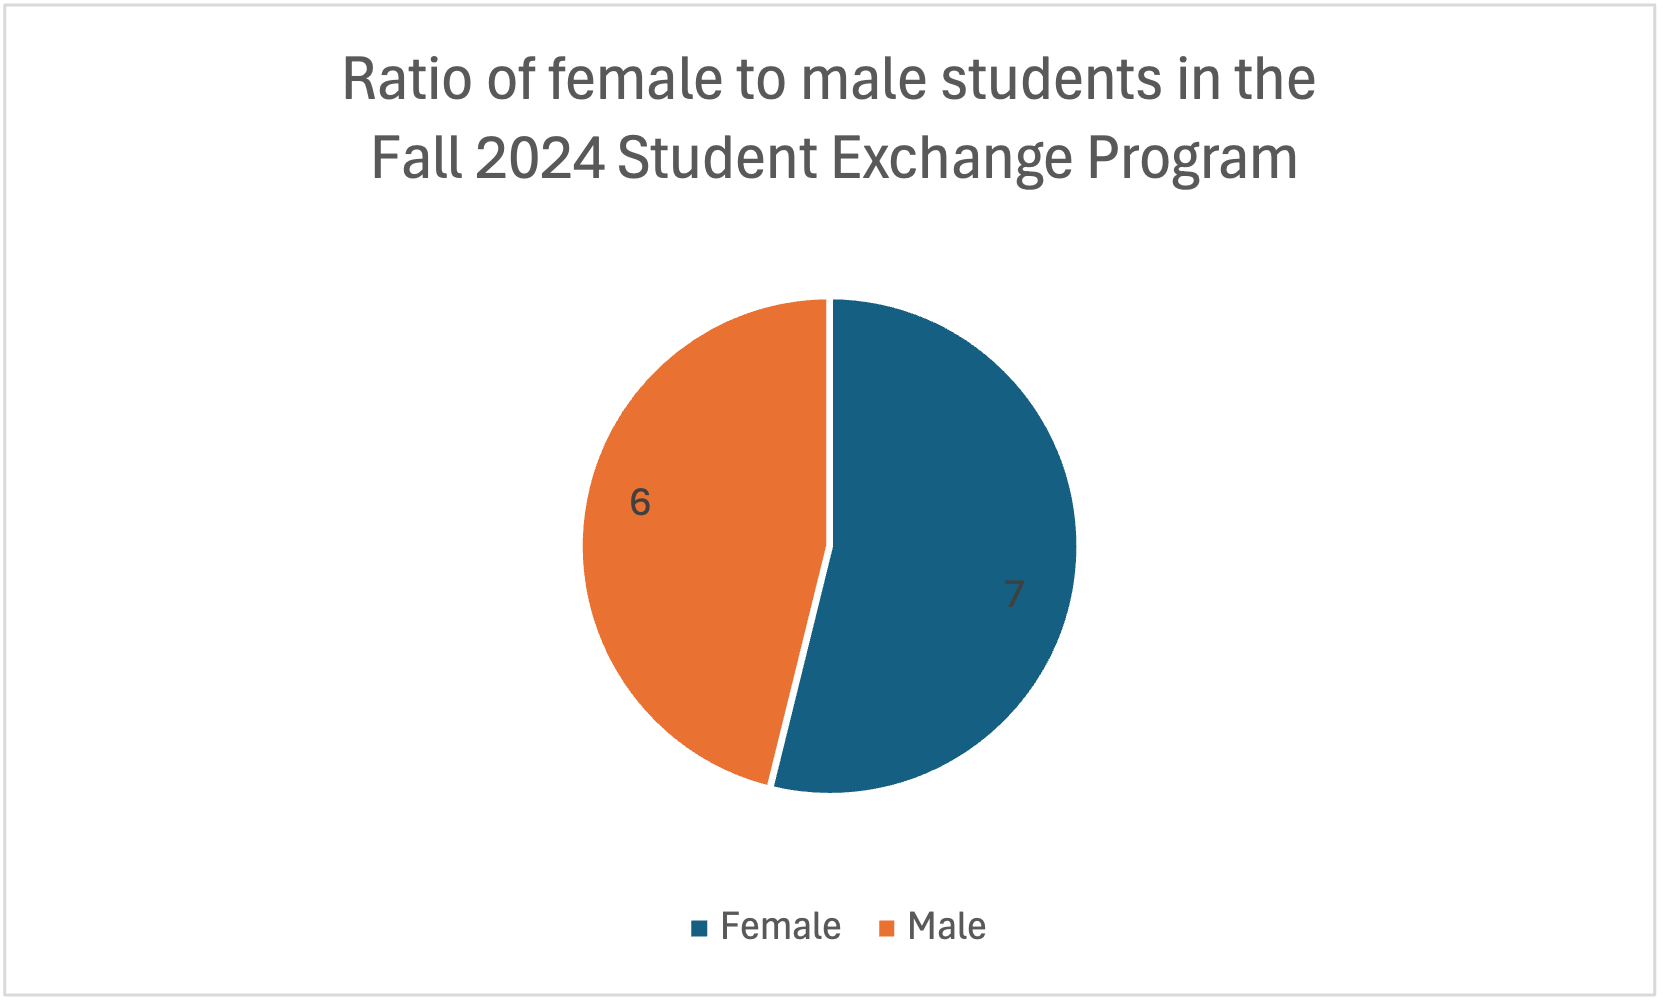 Pie chart depicting ratio of female to male students in Fall 2024 exchange program